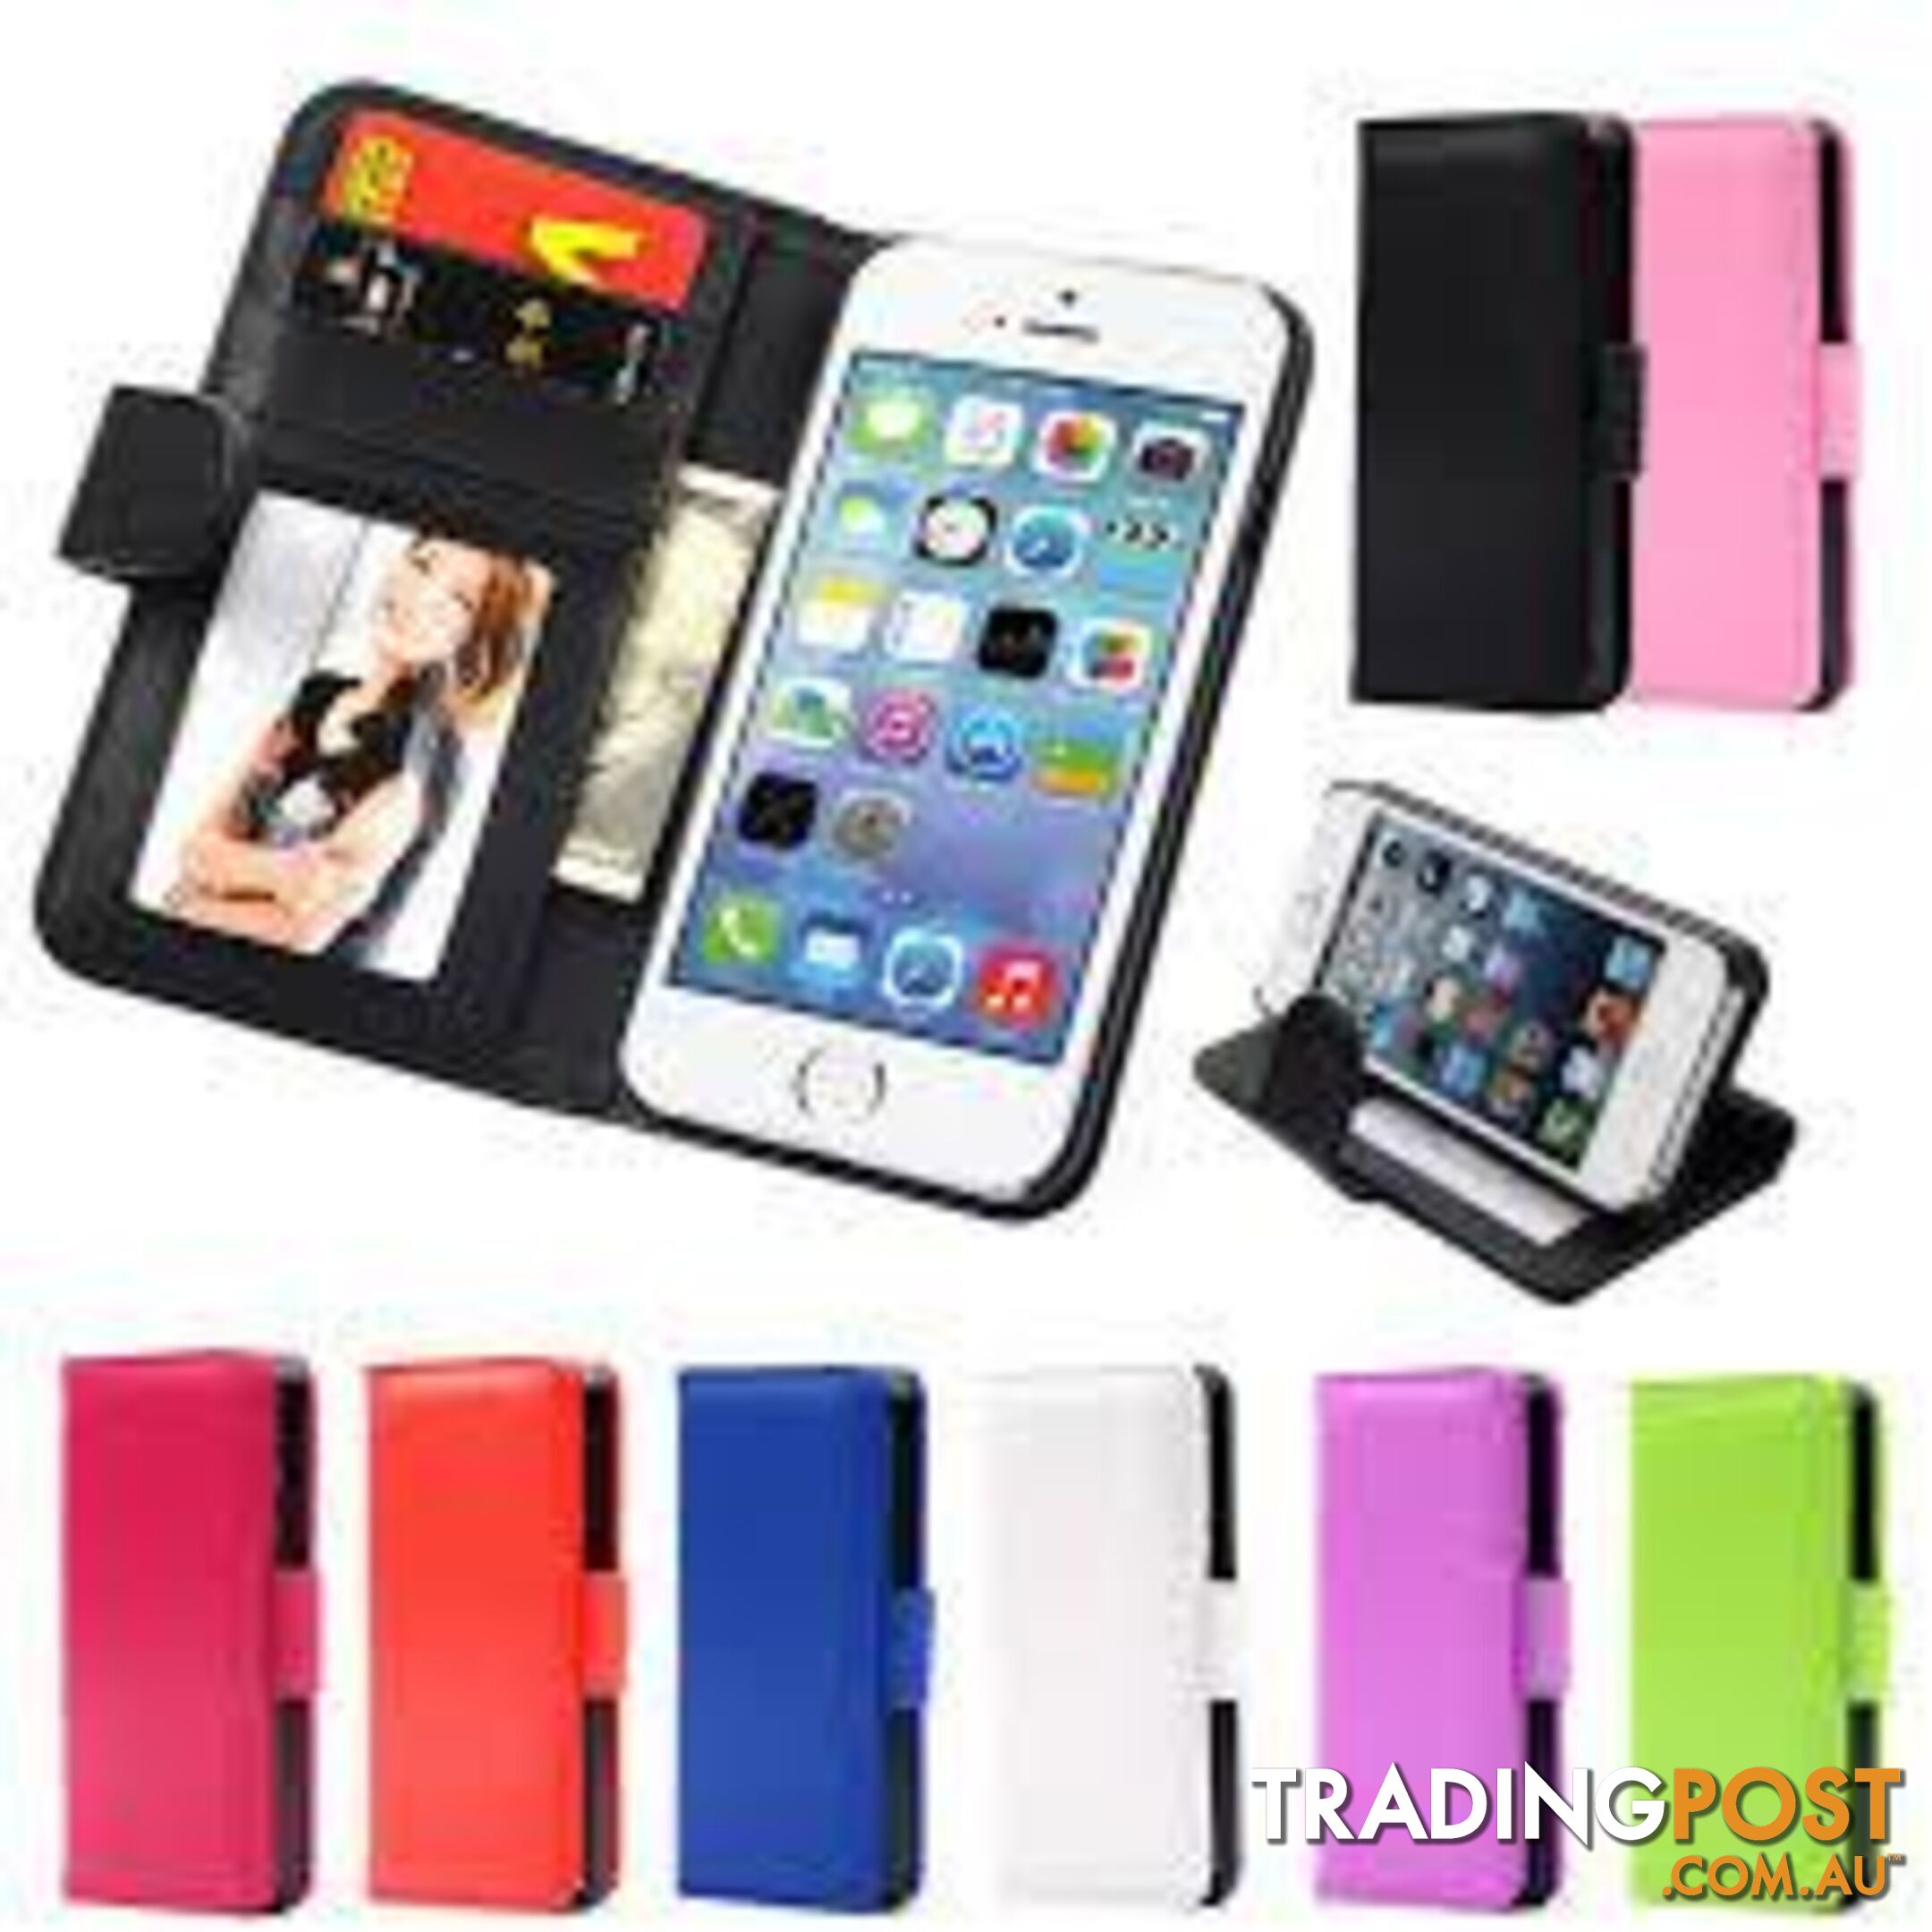 Apple iPhone Wallet Style Case - 4FD330 - Cases